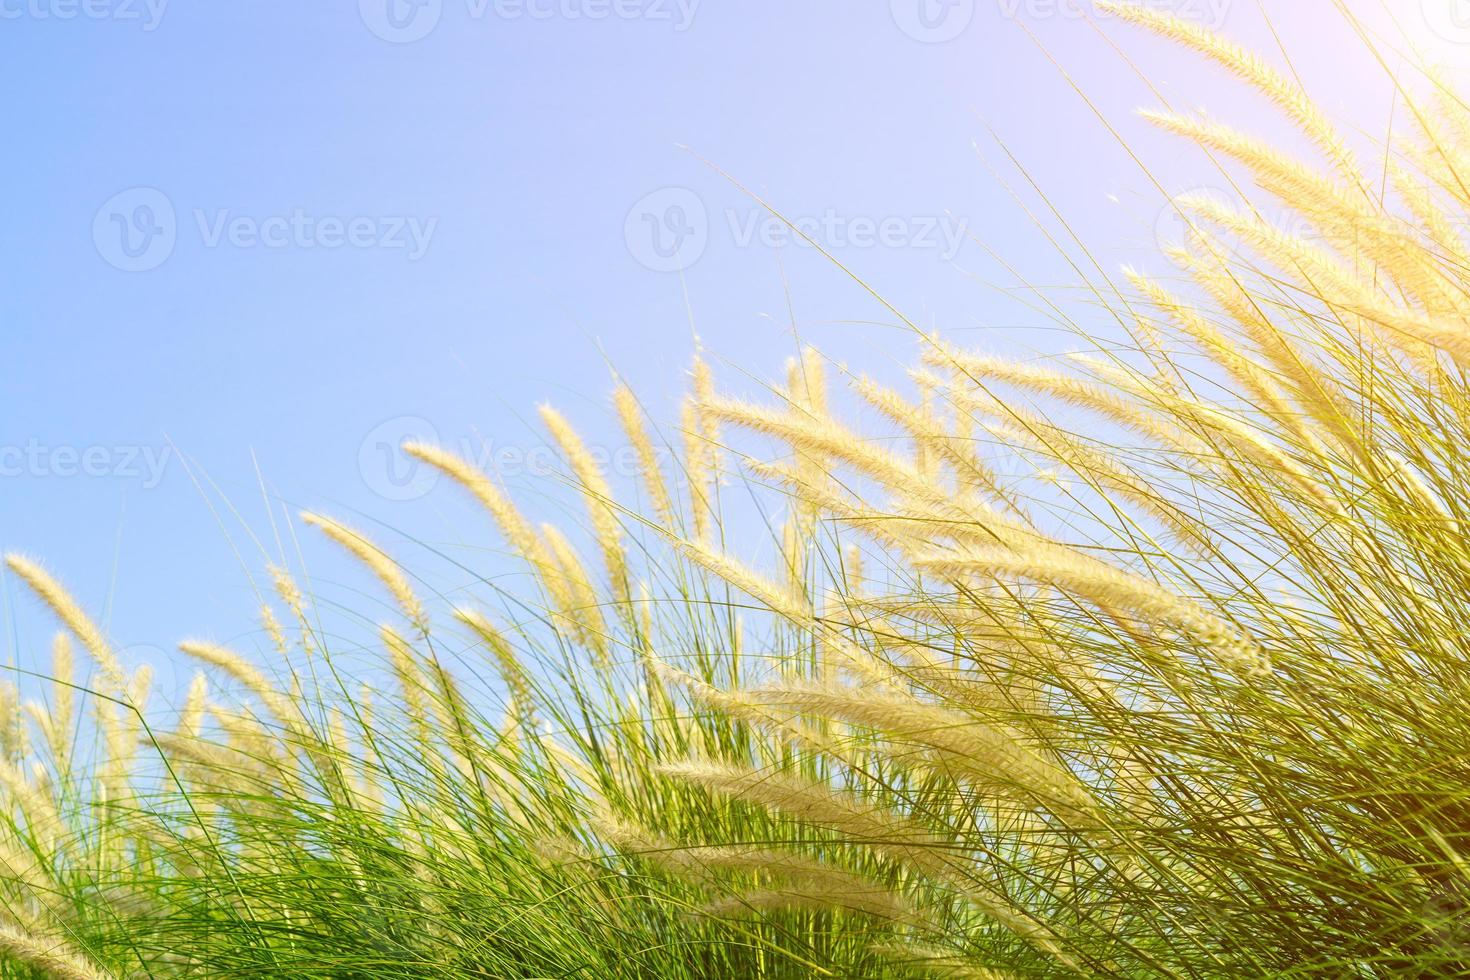 Fourtain grass in nature agent blue sky photo